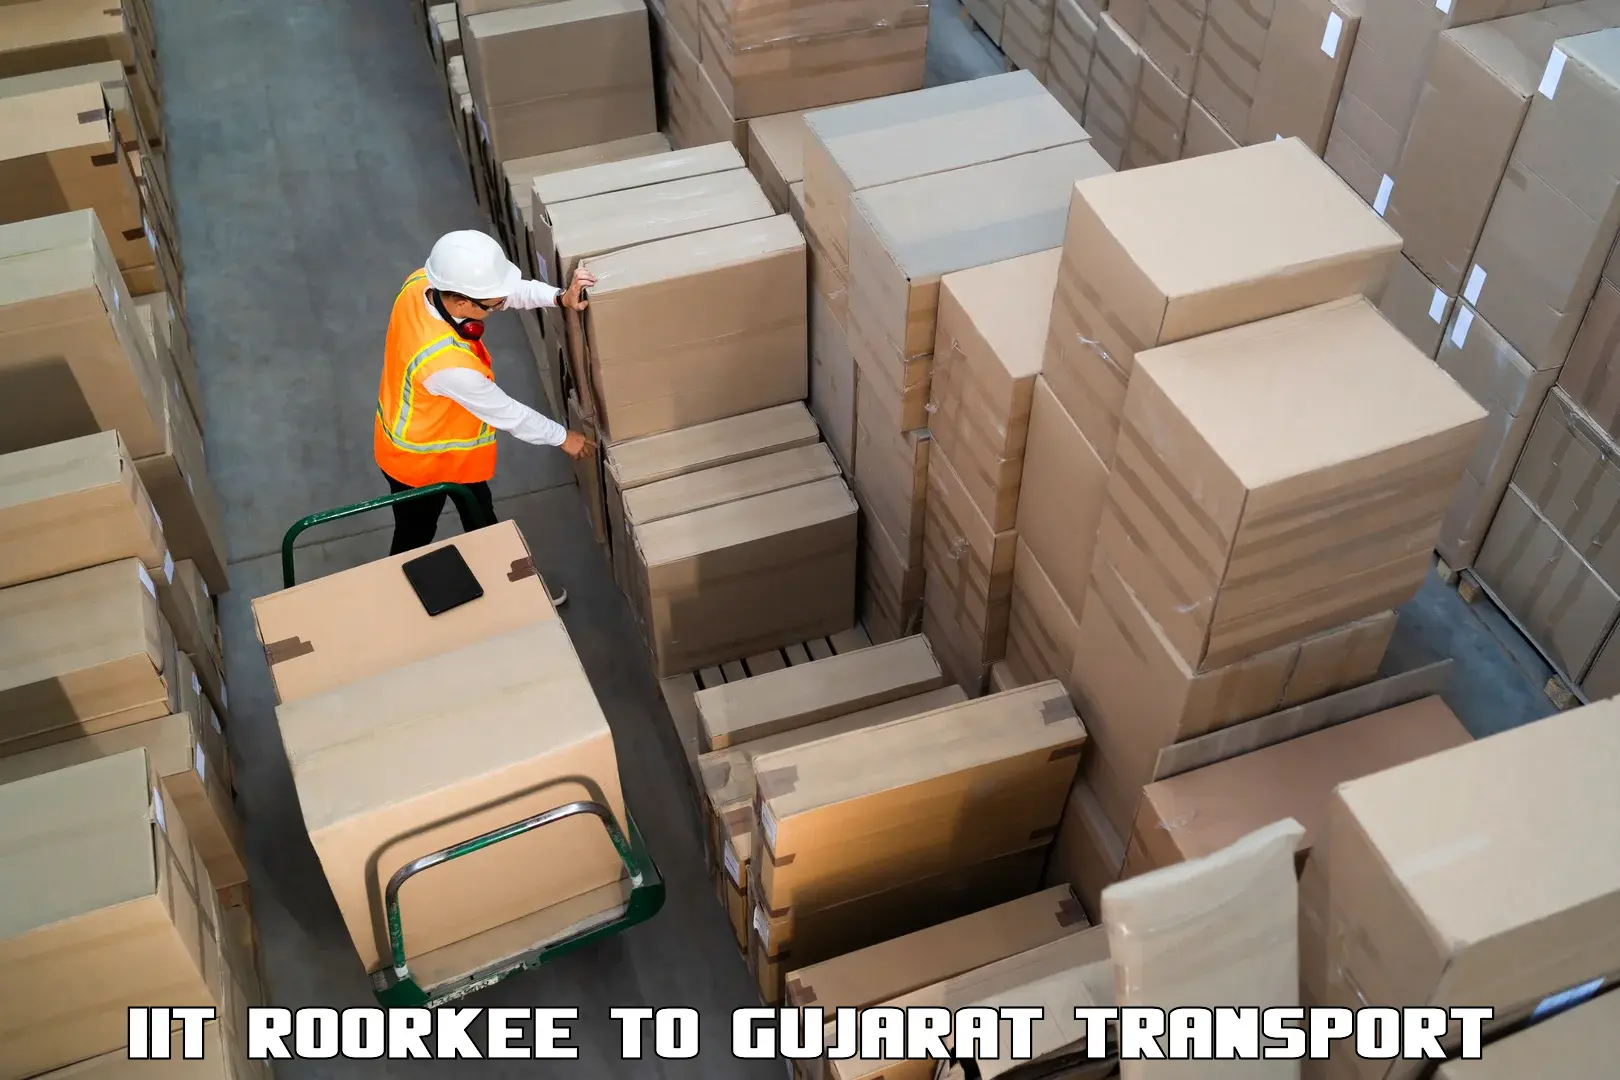 Container transport service IIT Roorkee to Bardoli